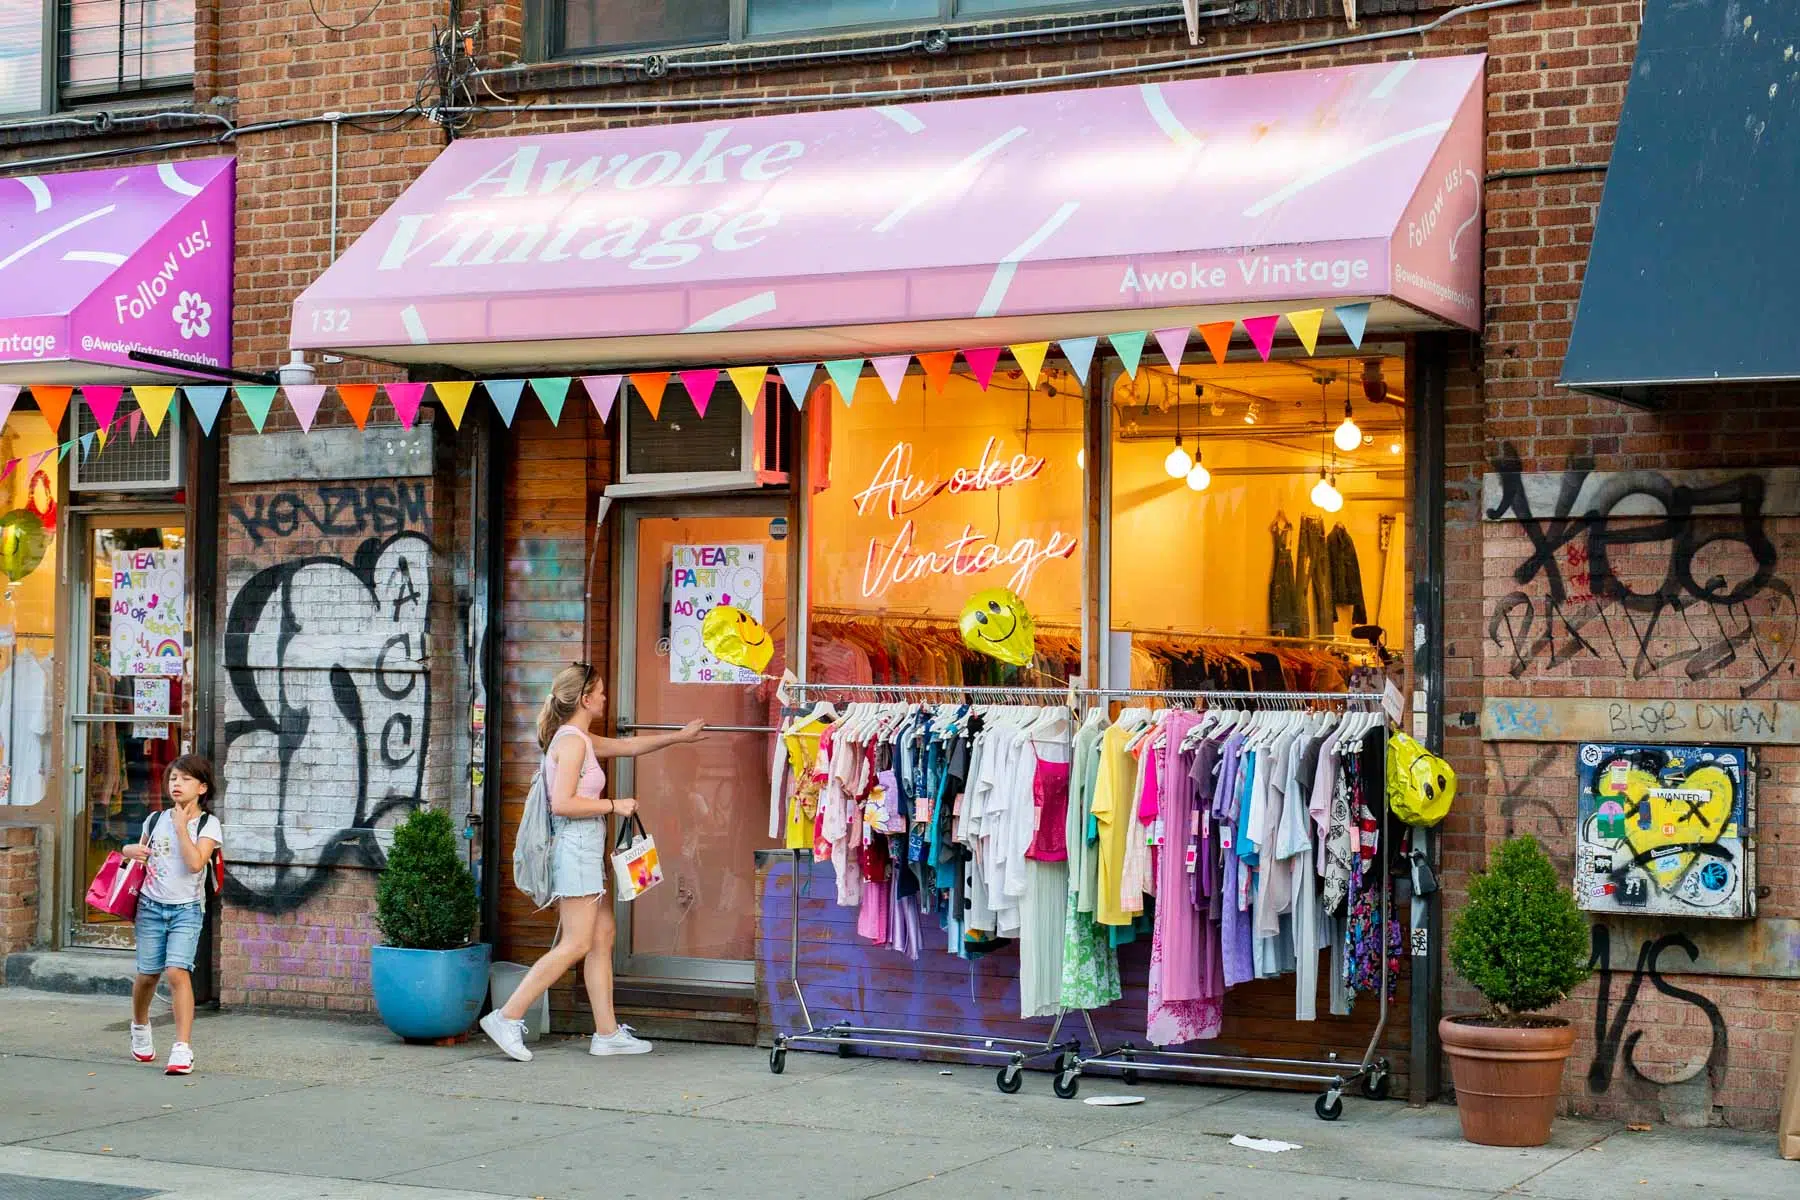 Best Vintage Stores Awoke Vintage, things to do in New York City in winter